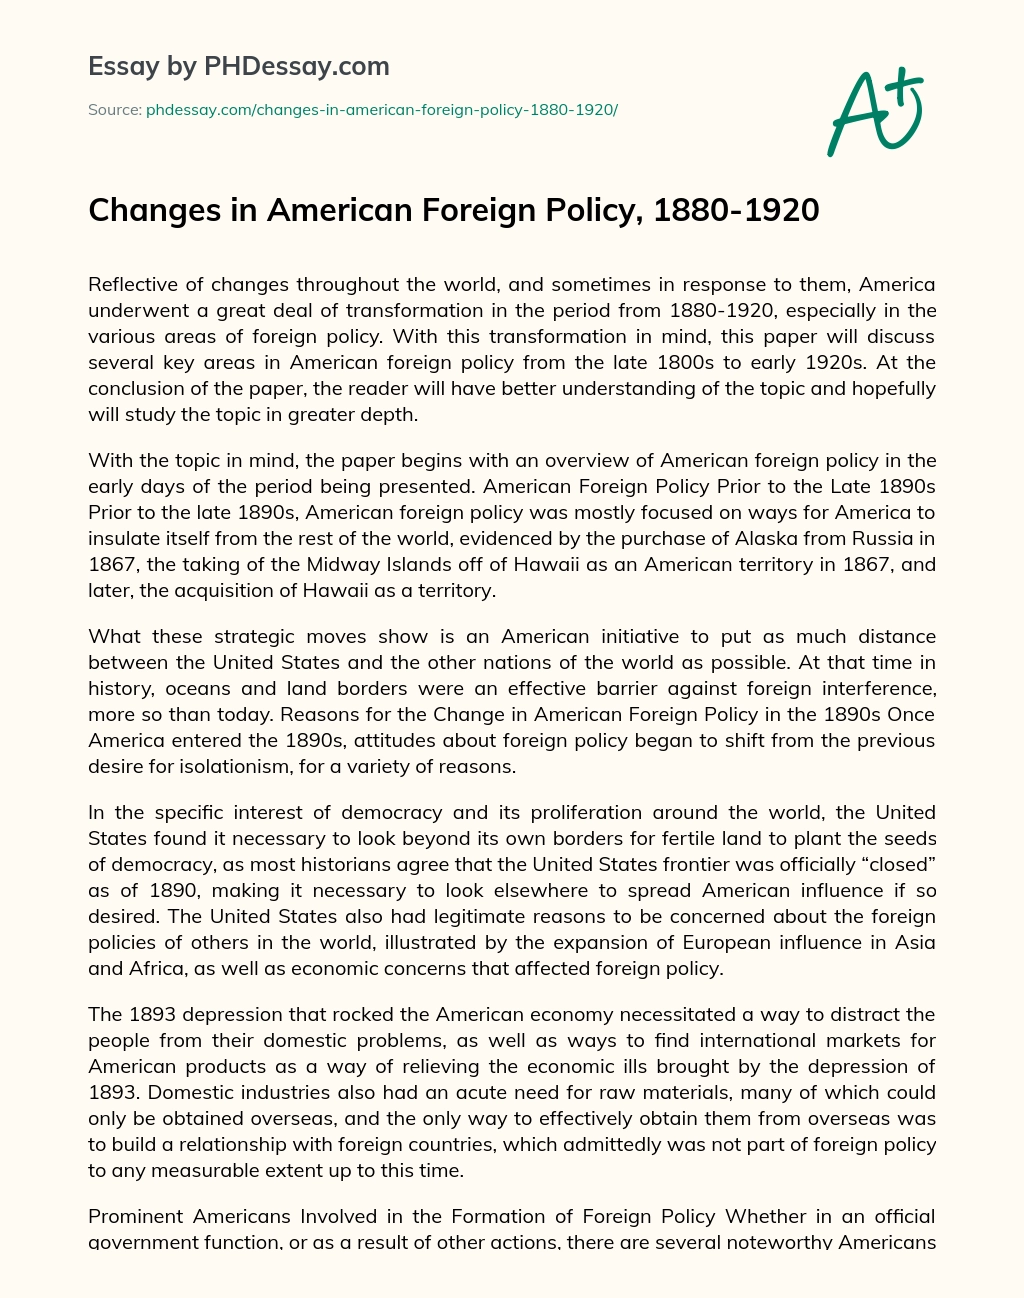 Changes in American Foreign Policy, 1880-1920 essay